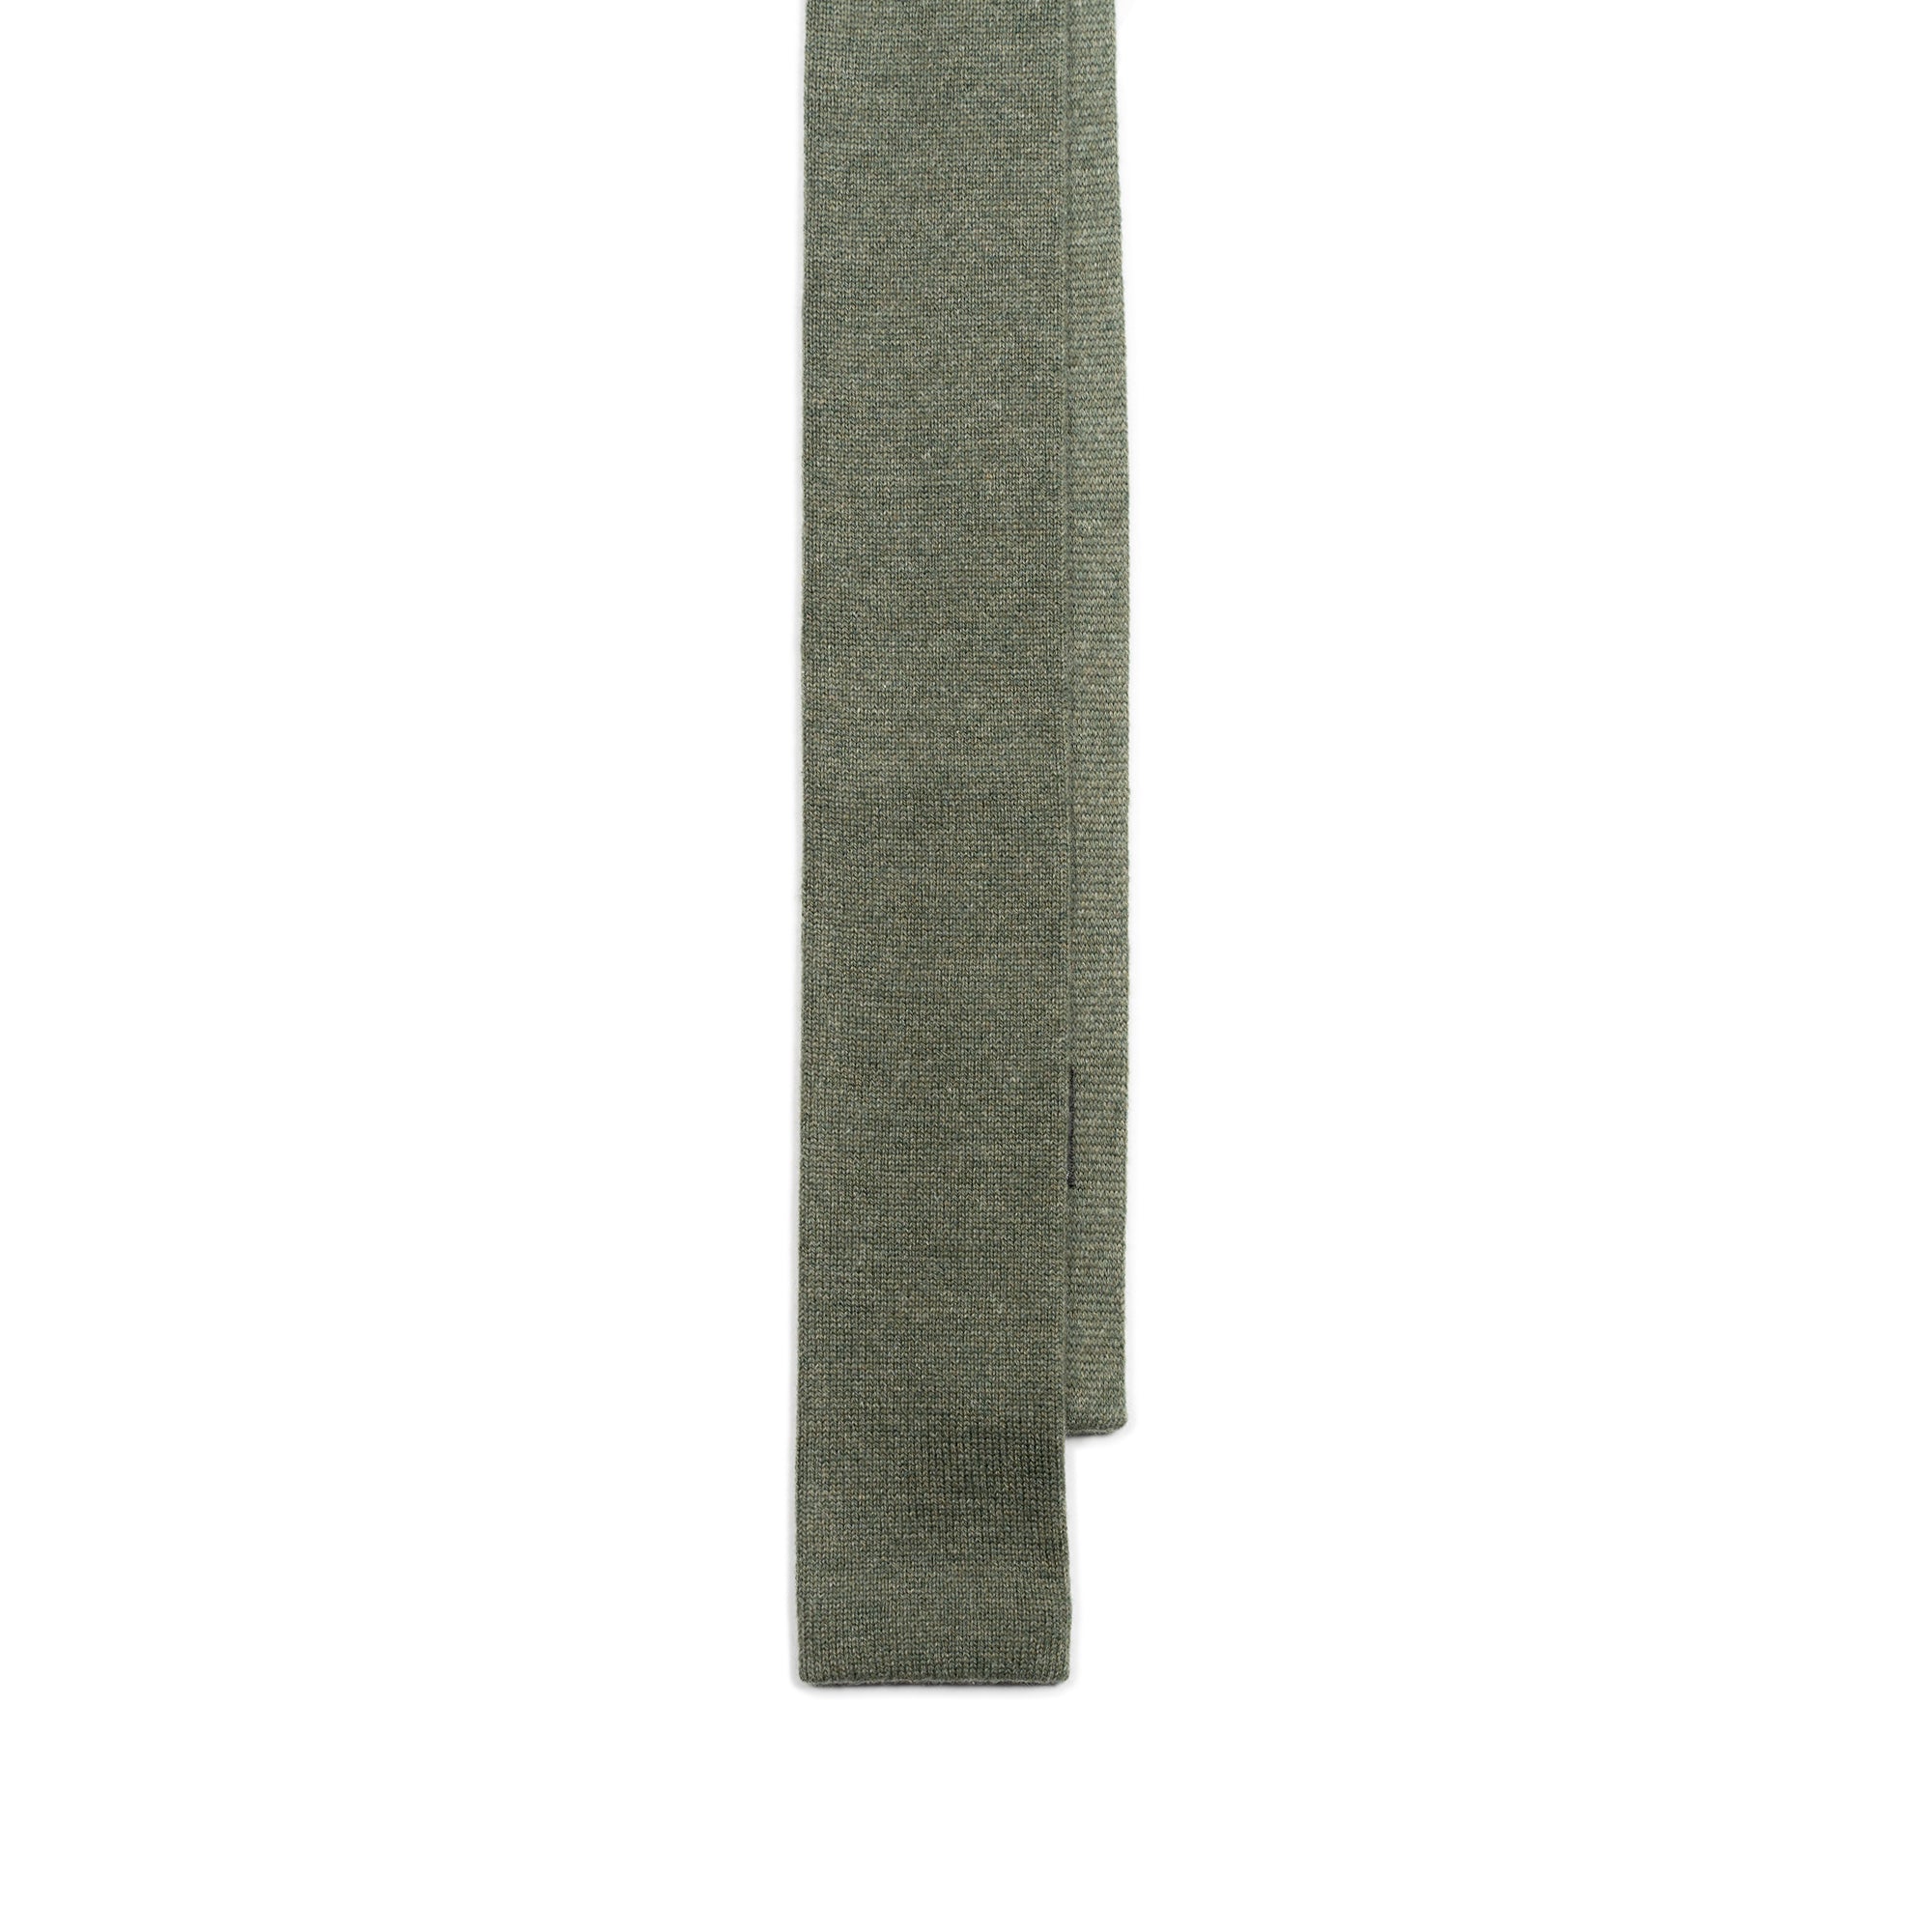 Ties - Olive Cashmere Knit